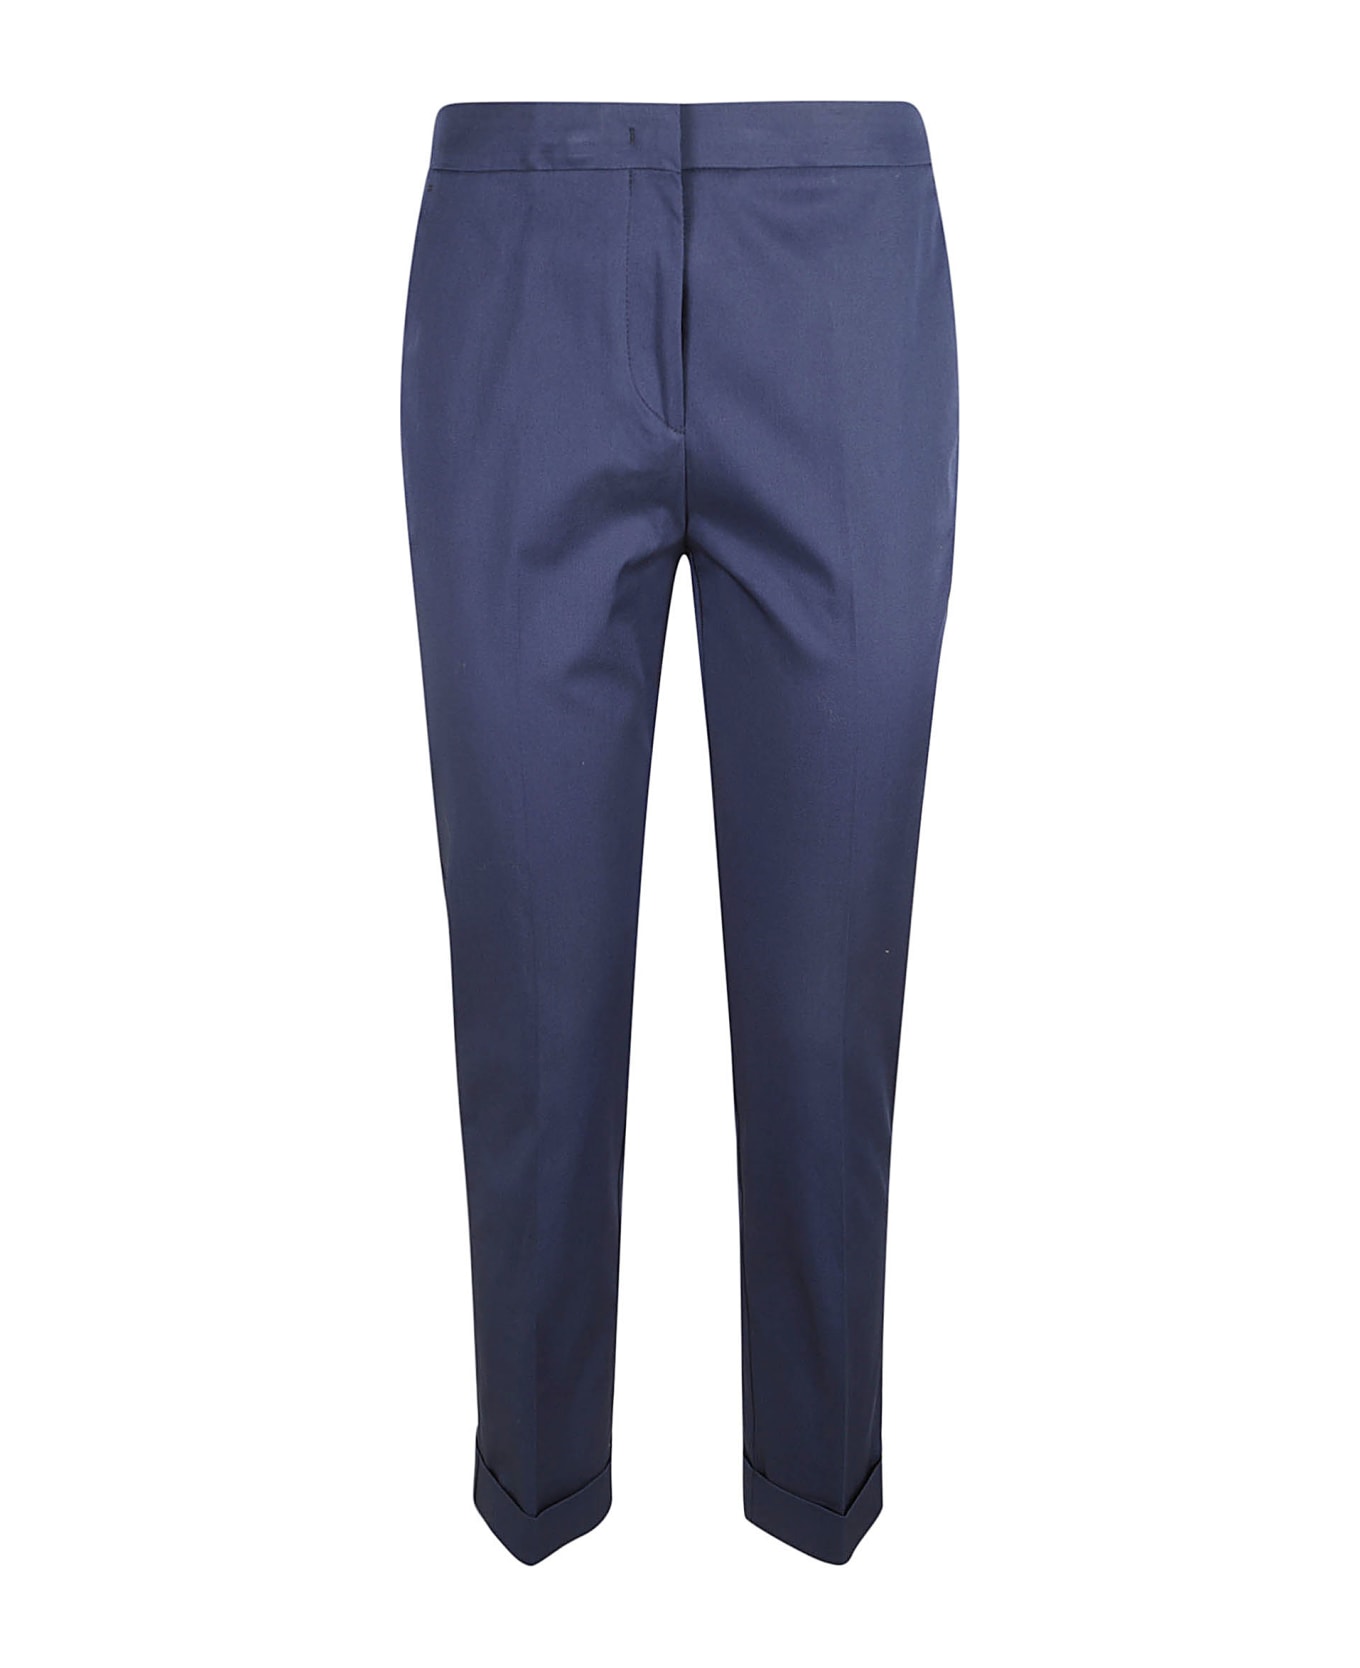 Etro Concealed Trousers - Blue ボトムス